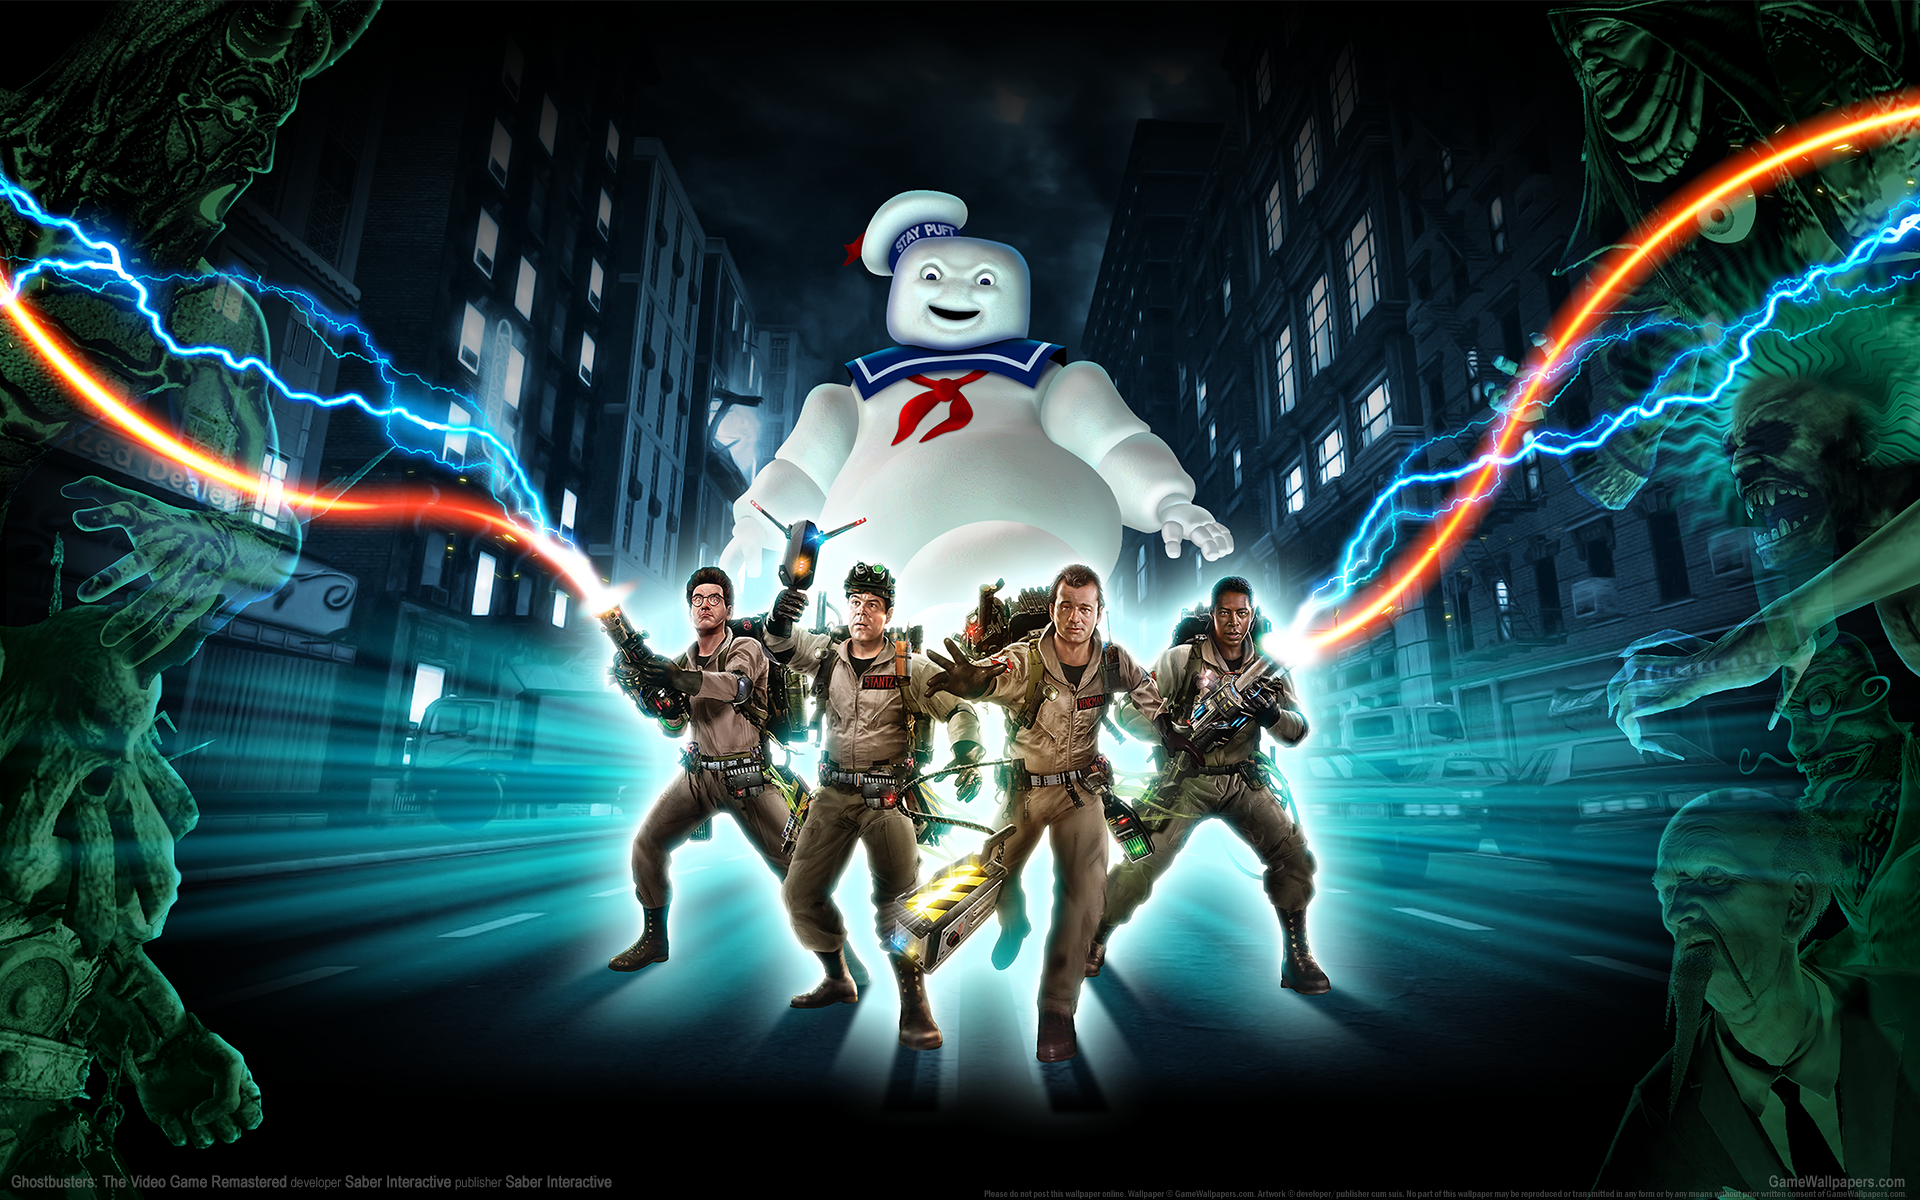 Ghostbusters: The Video Game Remastered 1920x1200 fond d'cran 01